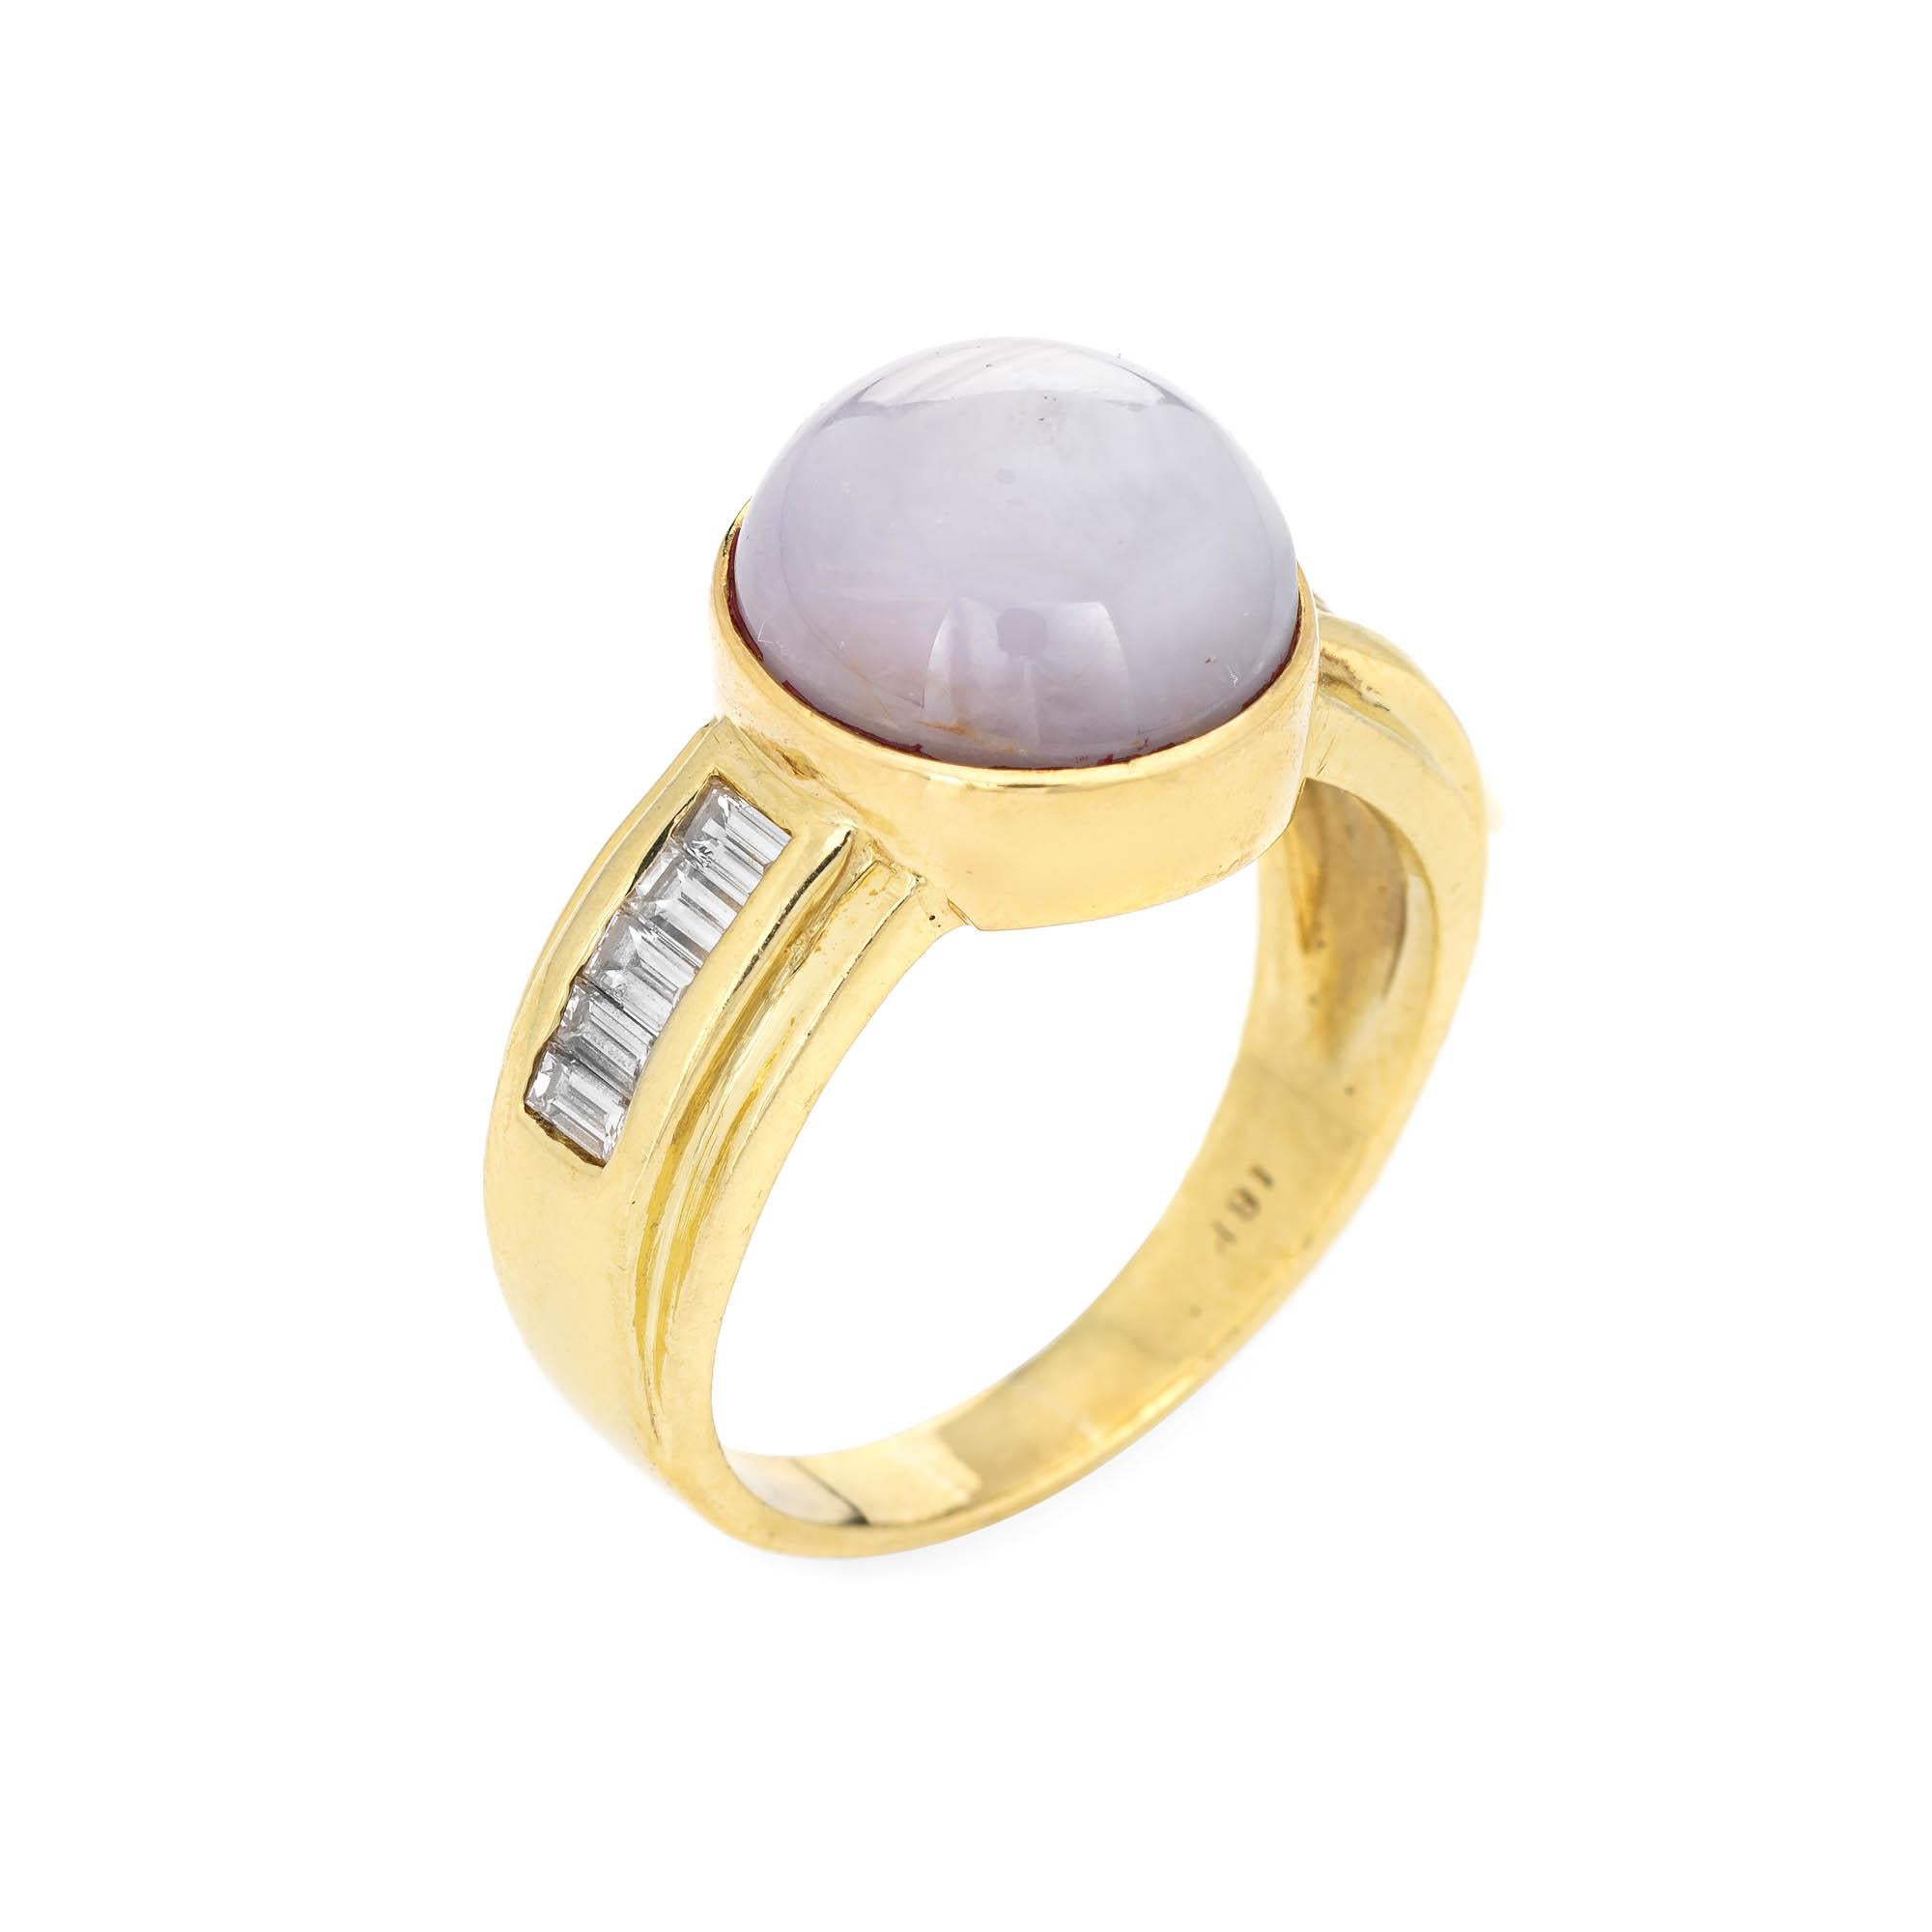 Stylish vintage natural star sapphire 7 diamond ring (circa 1980s to 1990s) crafted in 18 karat yellow gold. 

Cabochon cut natural star sapphire measures 12mm diameter (estimated at 9 carats). Straight baguette cut diamonds total an estimated 0.50